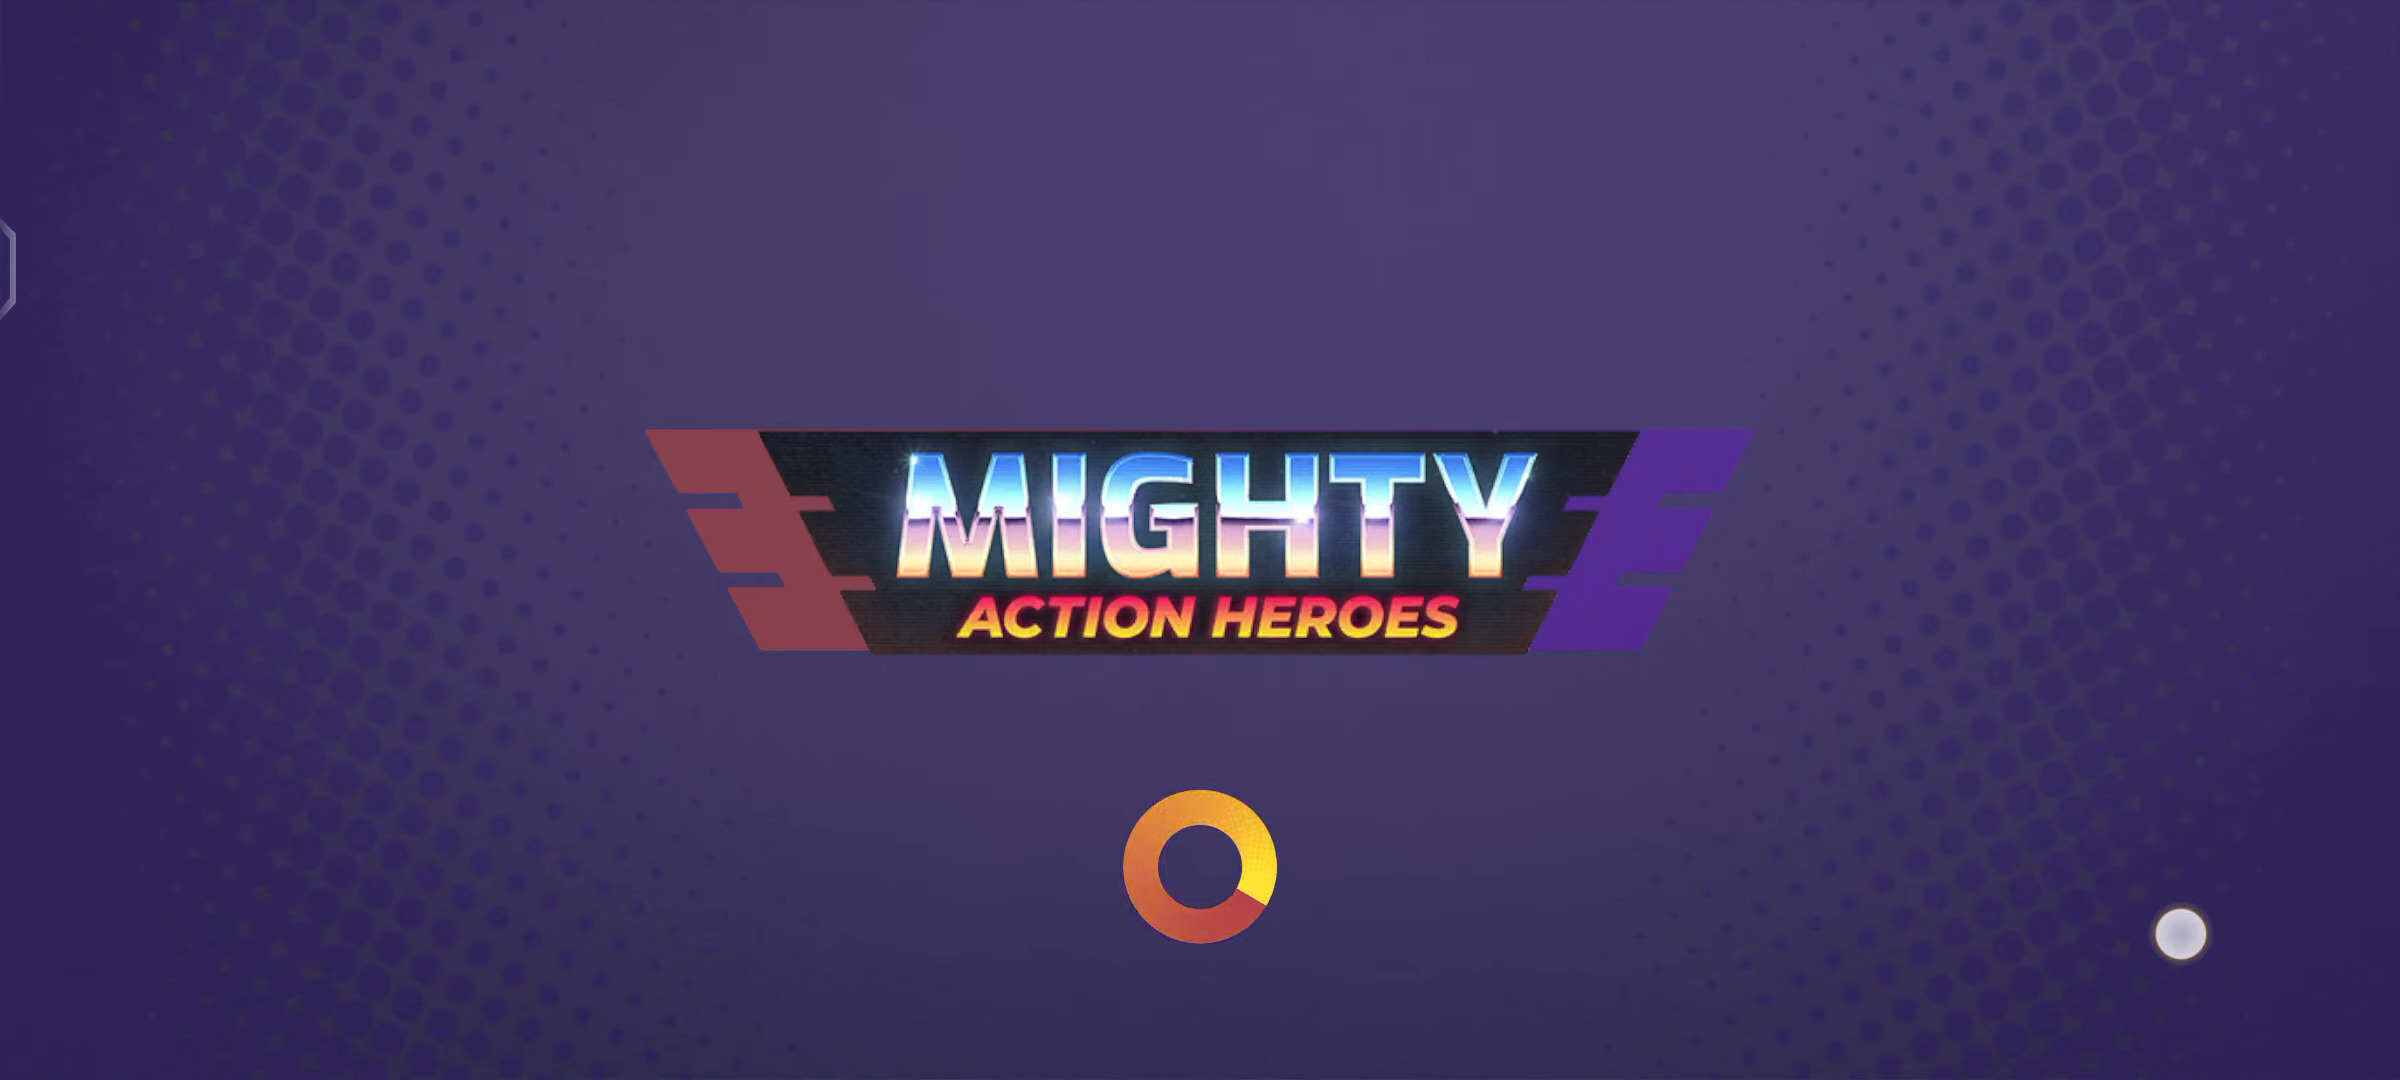 Download Mighty Action Heroes Android free game.